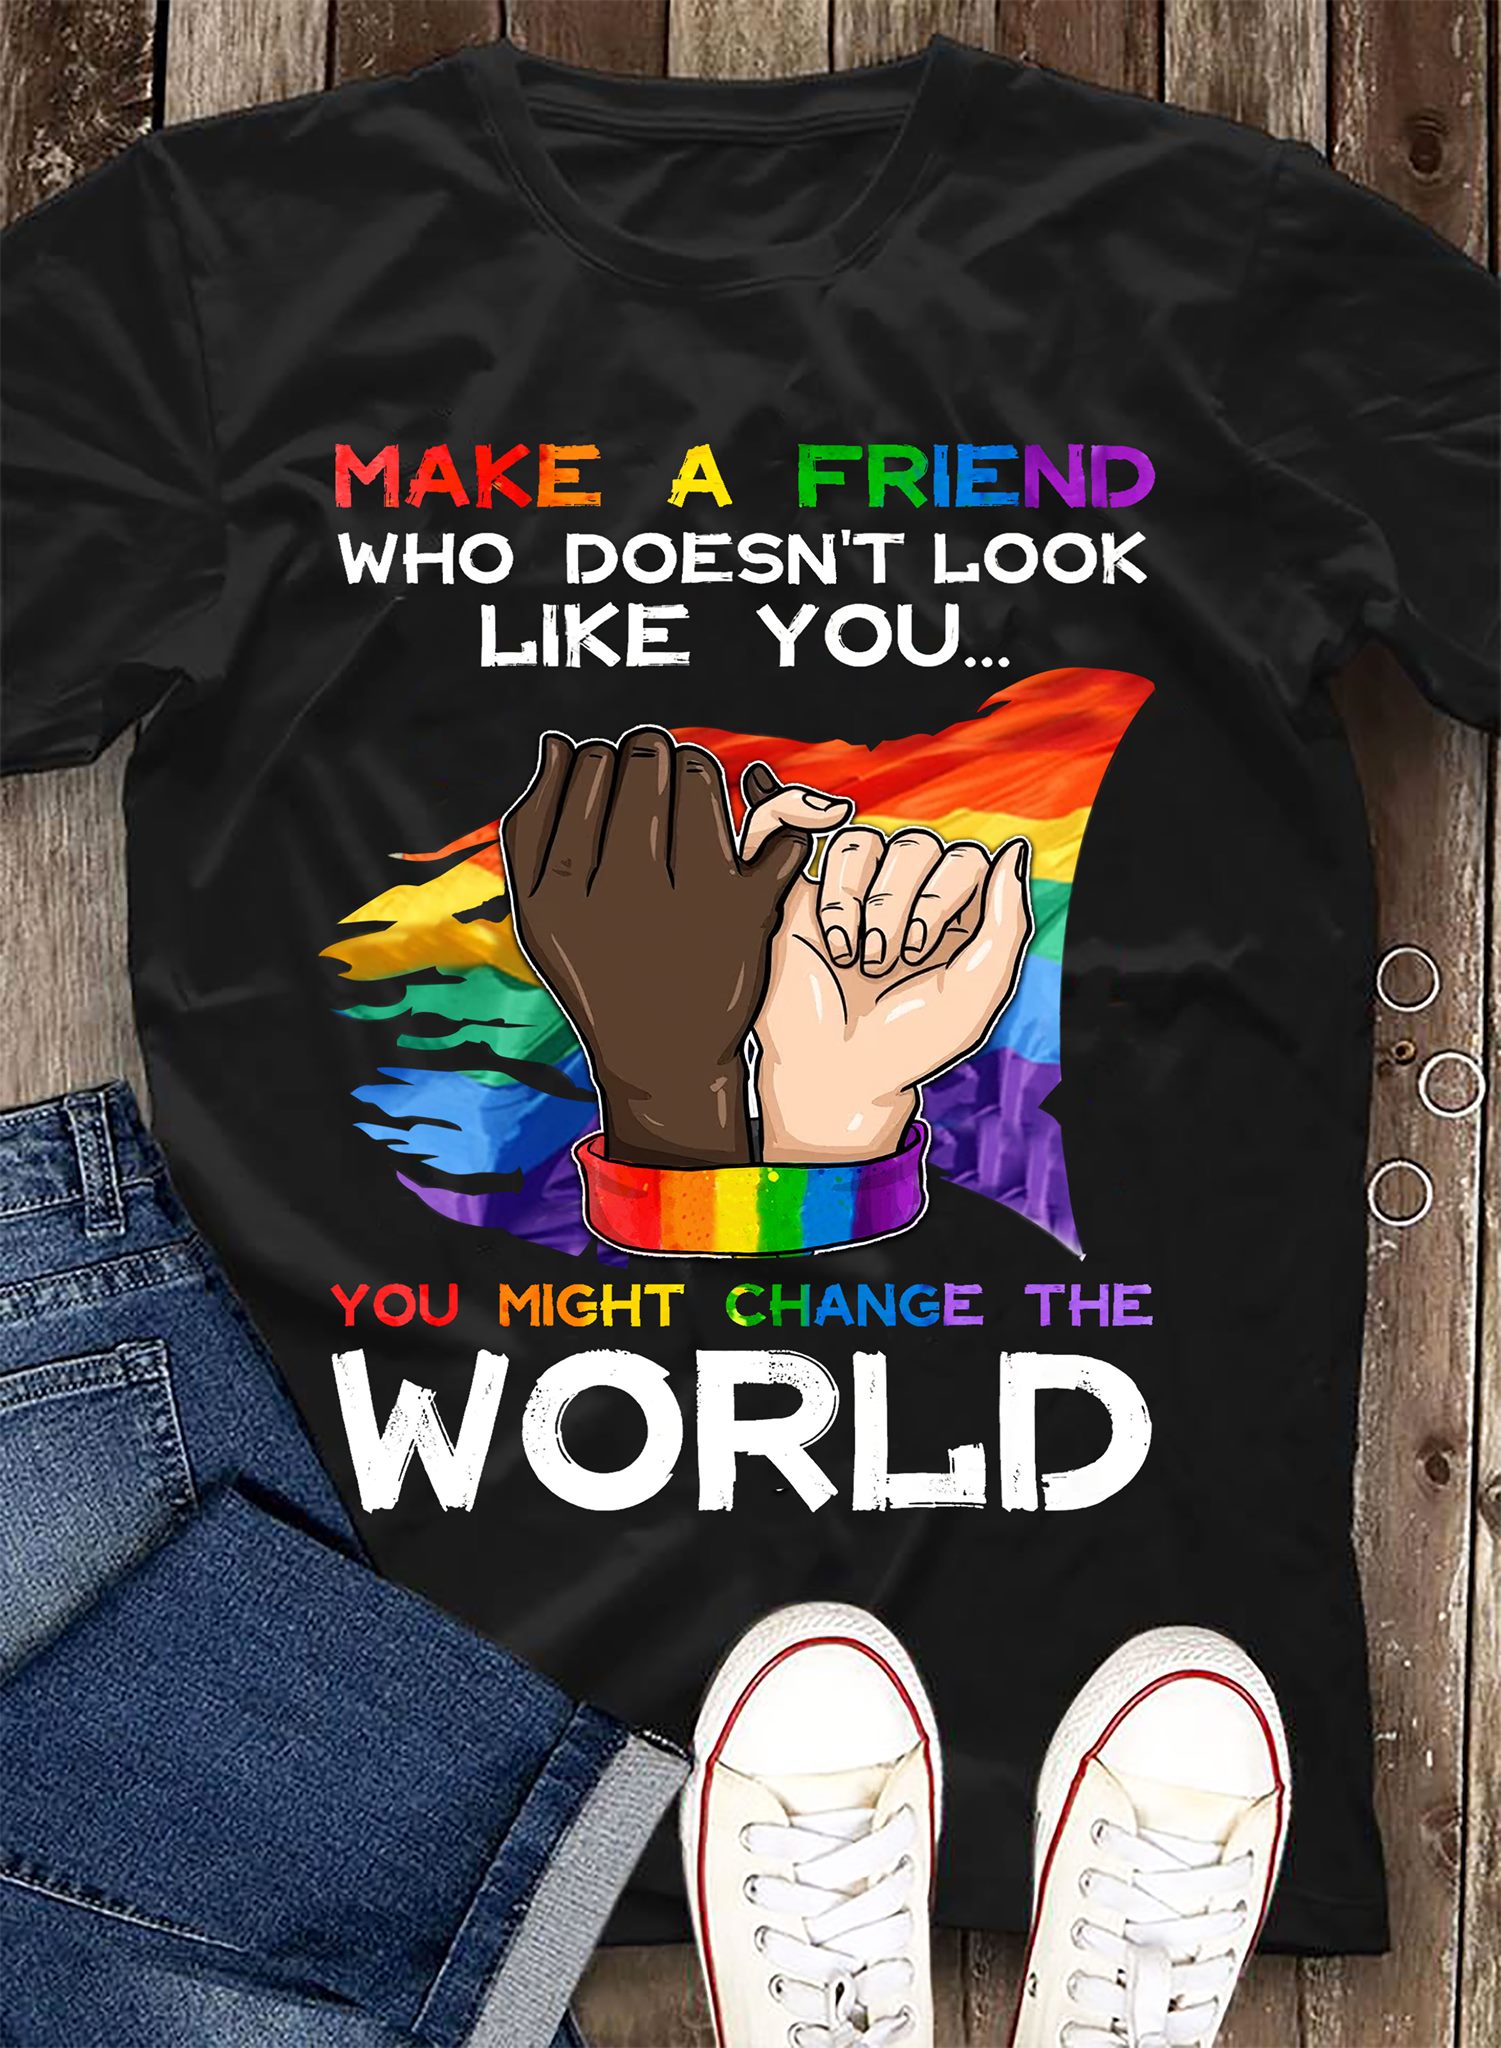 Make a friend who doesn't look like you you might change the world - Black community, lgbt community